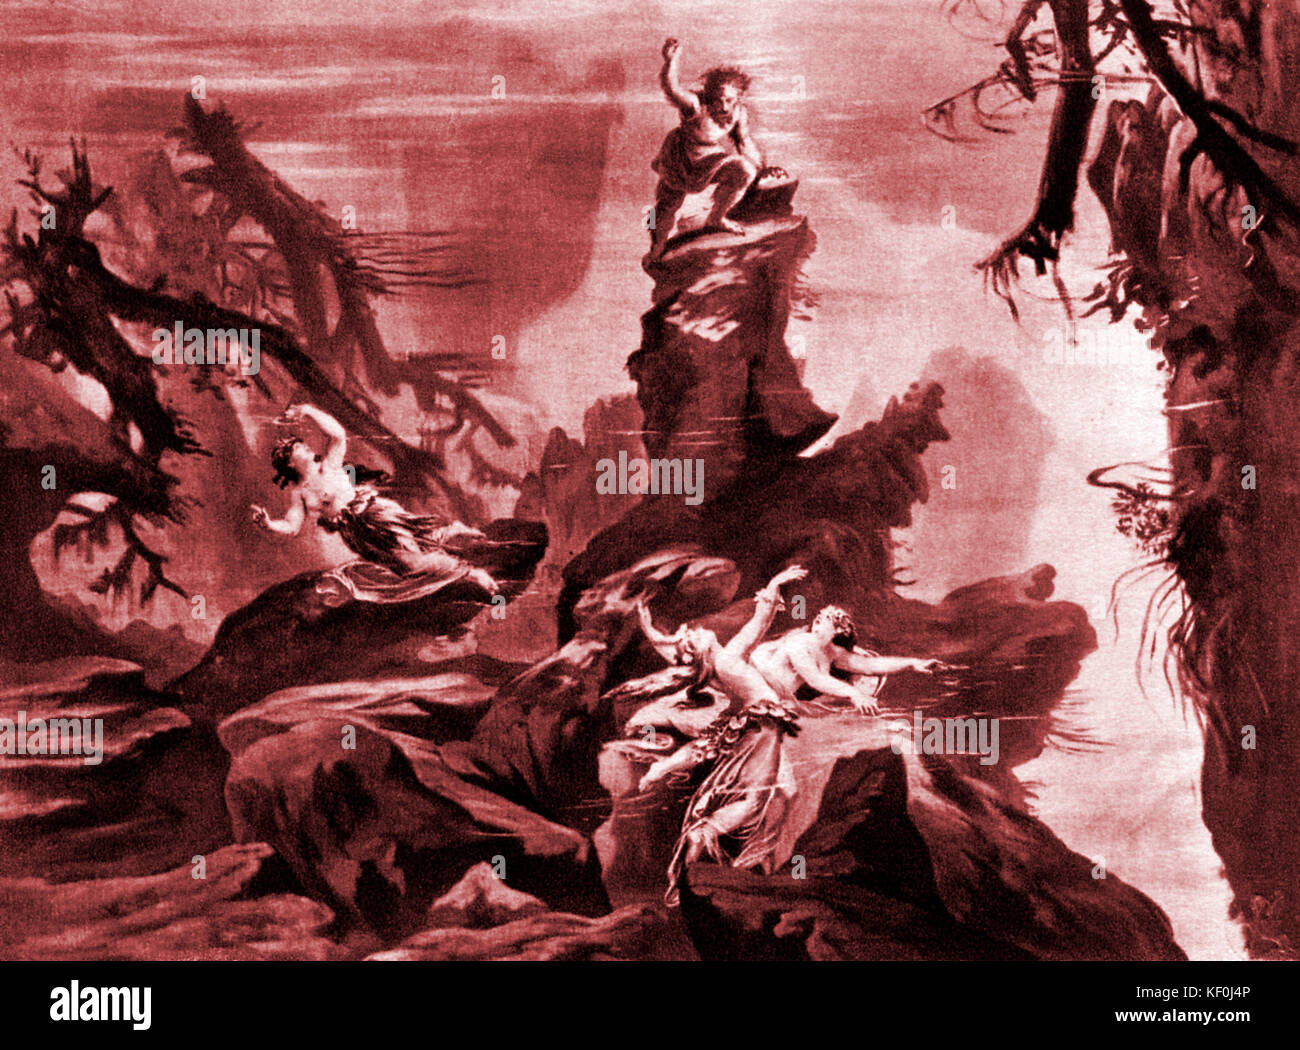 The Rhinegold / Das Rheingold by Richard Wagner. Set design by Josef Hoffmann. Caption: In the depth of the Rhine. RW: German composer & author, 22 May 1813 - 13 February 1883. Tinted version. Stock Photo